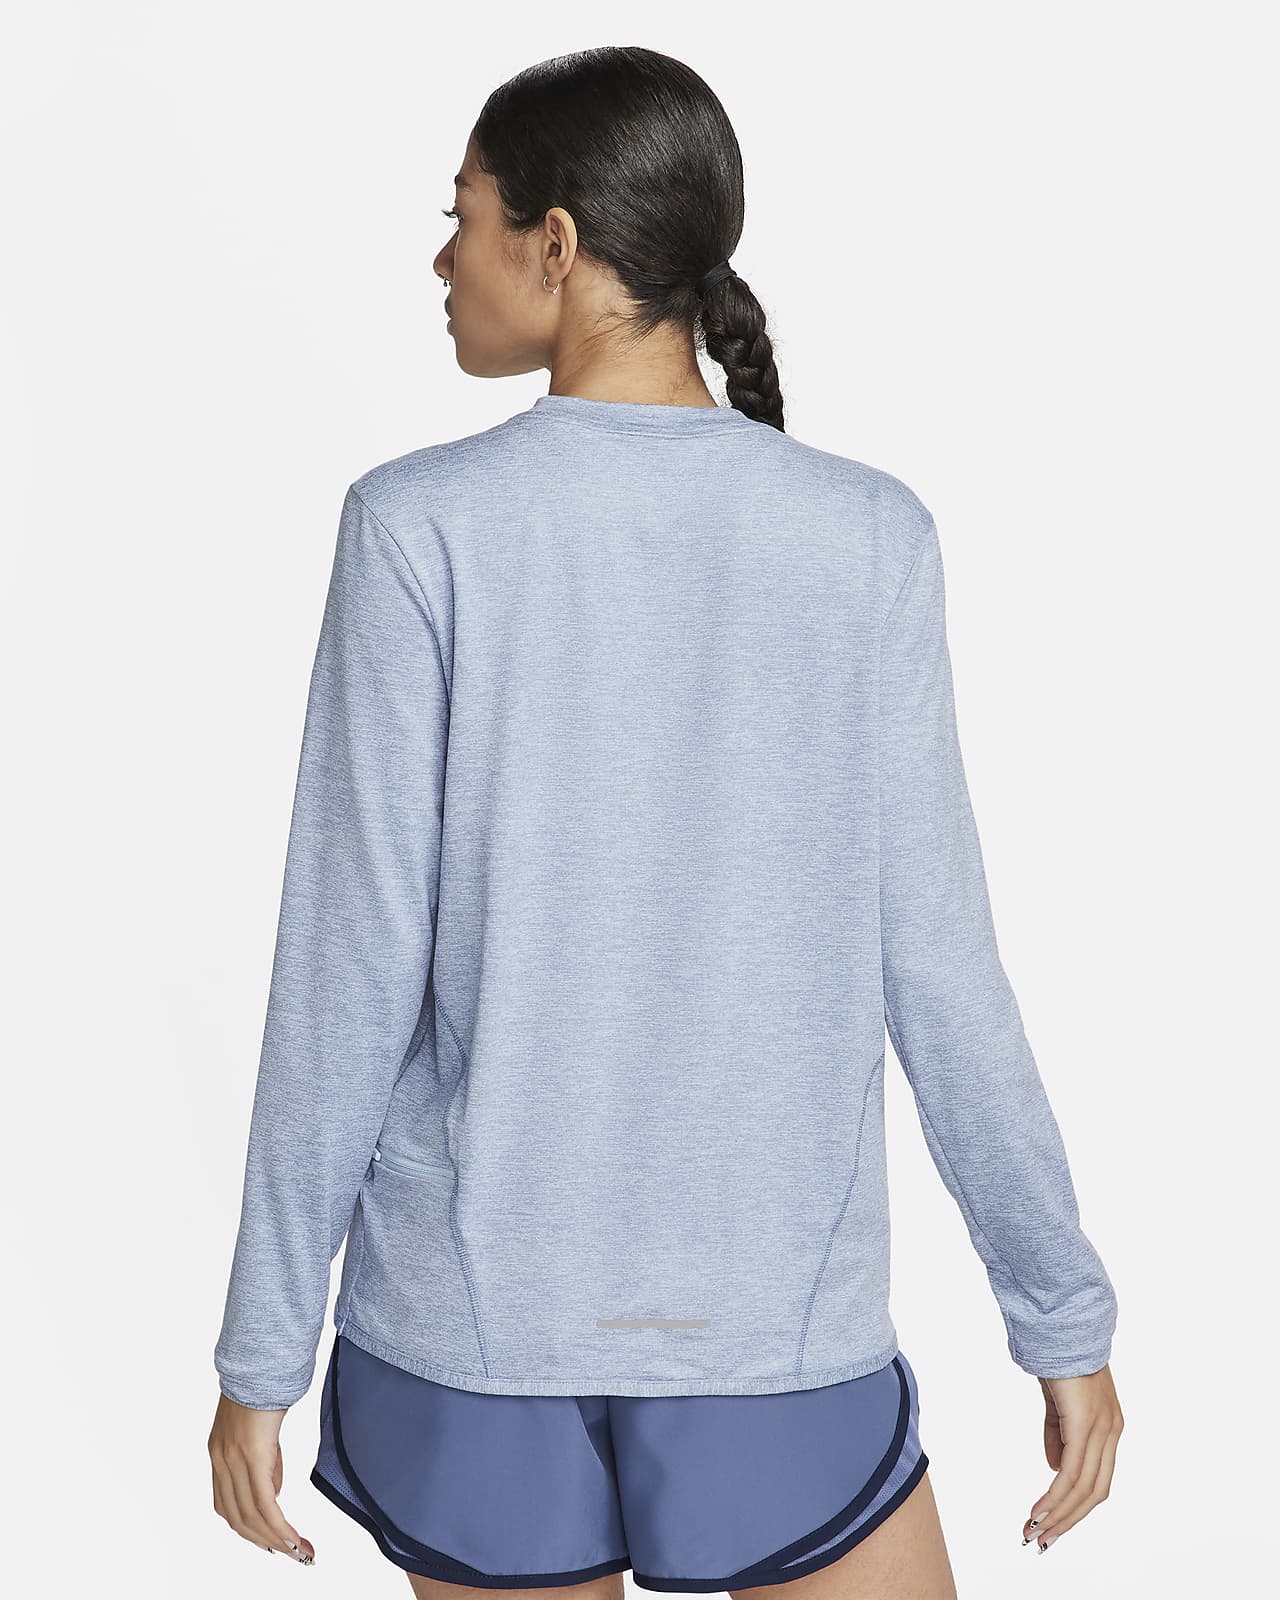 Women's Second Skin High Neck Top from Crew Clothing Company